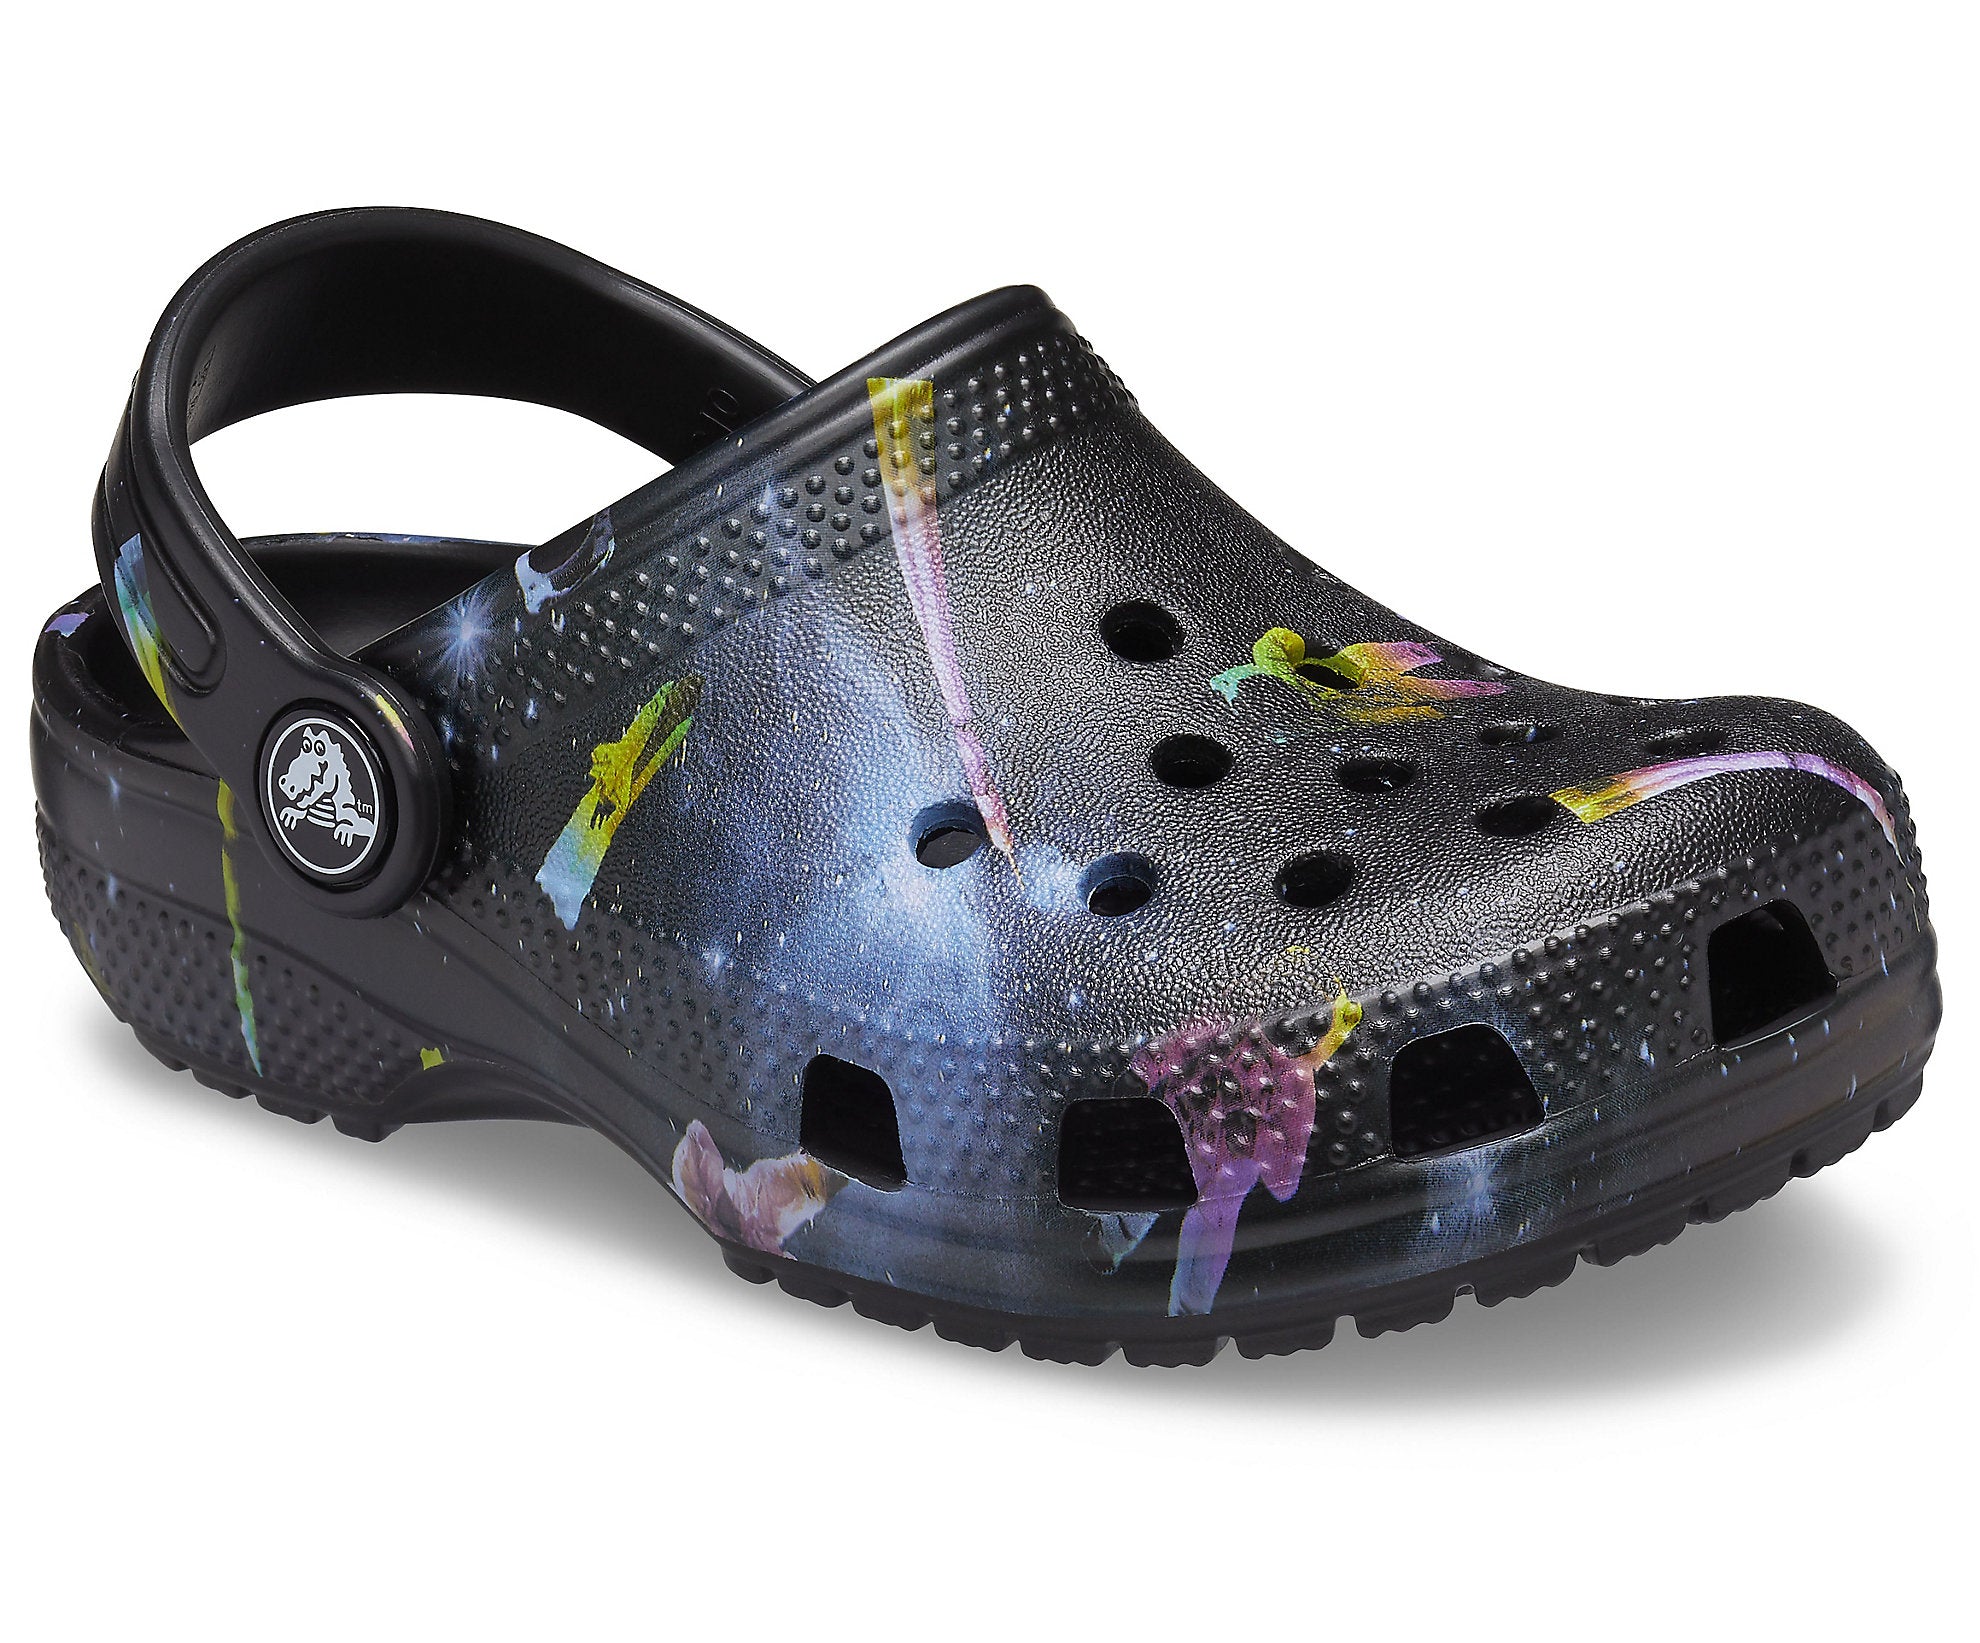 Crocs Classic Out of this World kids black sandal mules #206818